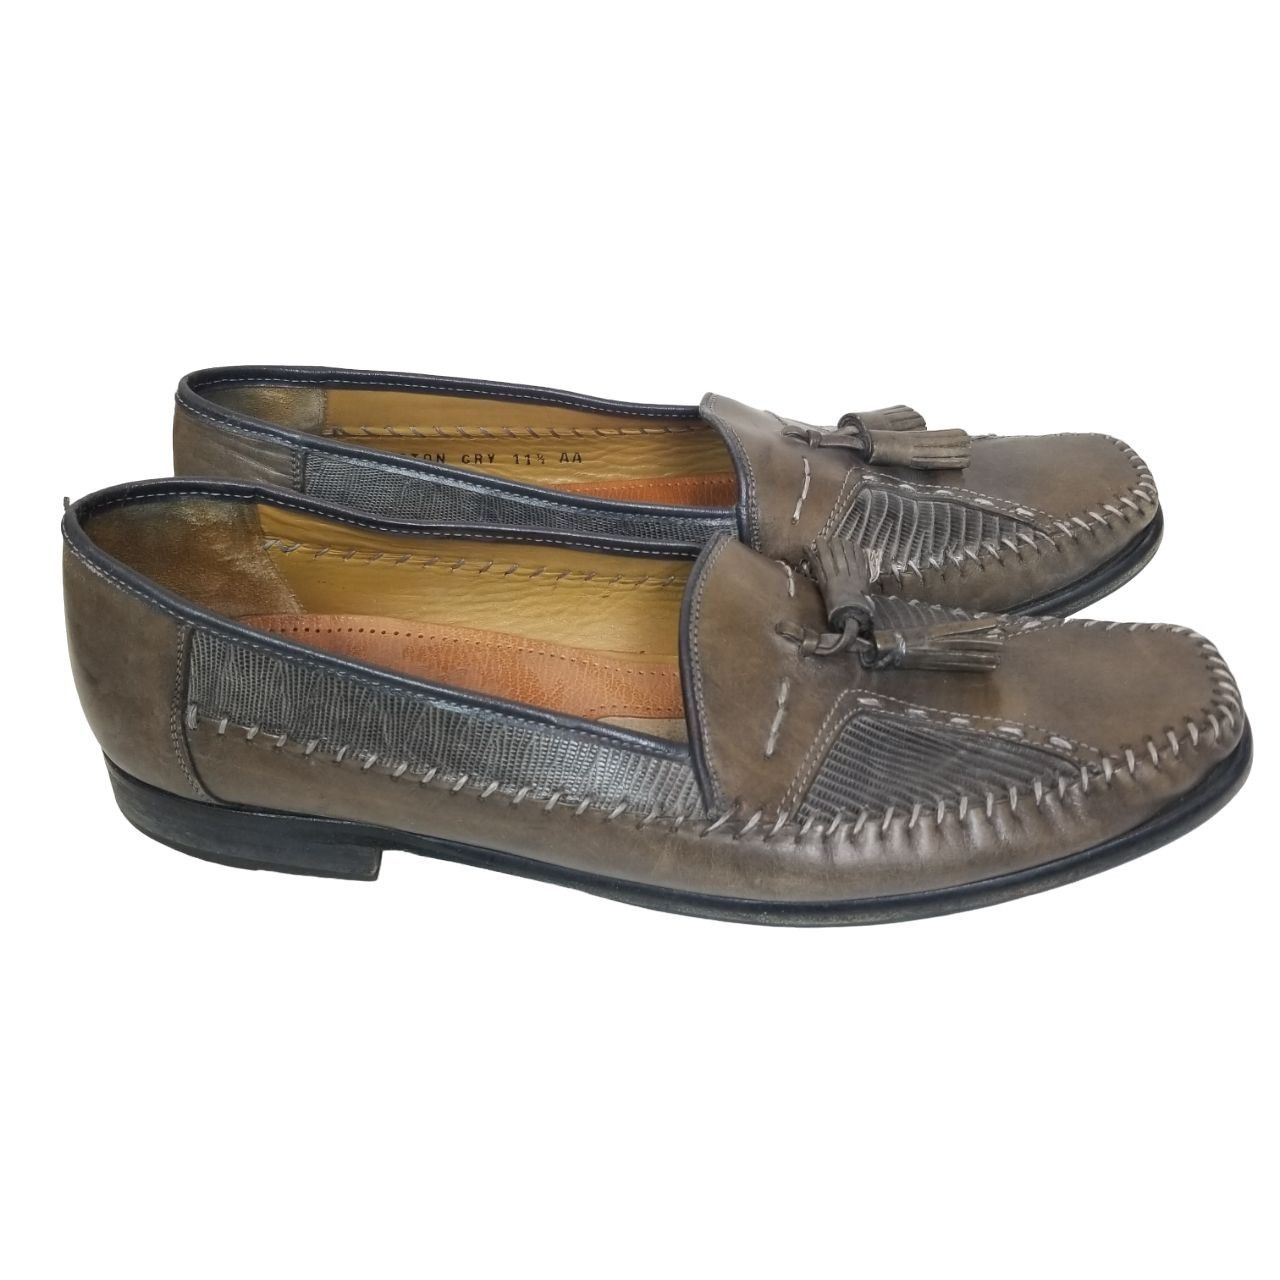 Sandro Moscoloni Sandro Moscoloni 11.5AA Leather Slip On Tassel Loafers Size US 11.5 / EU 44-45 - 1 Preview